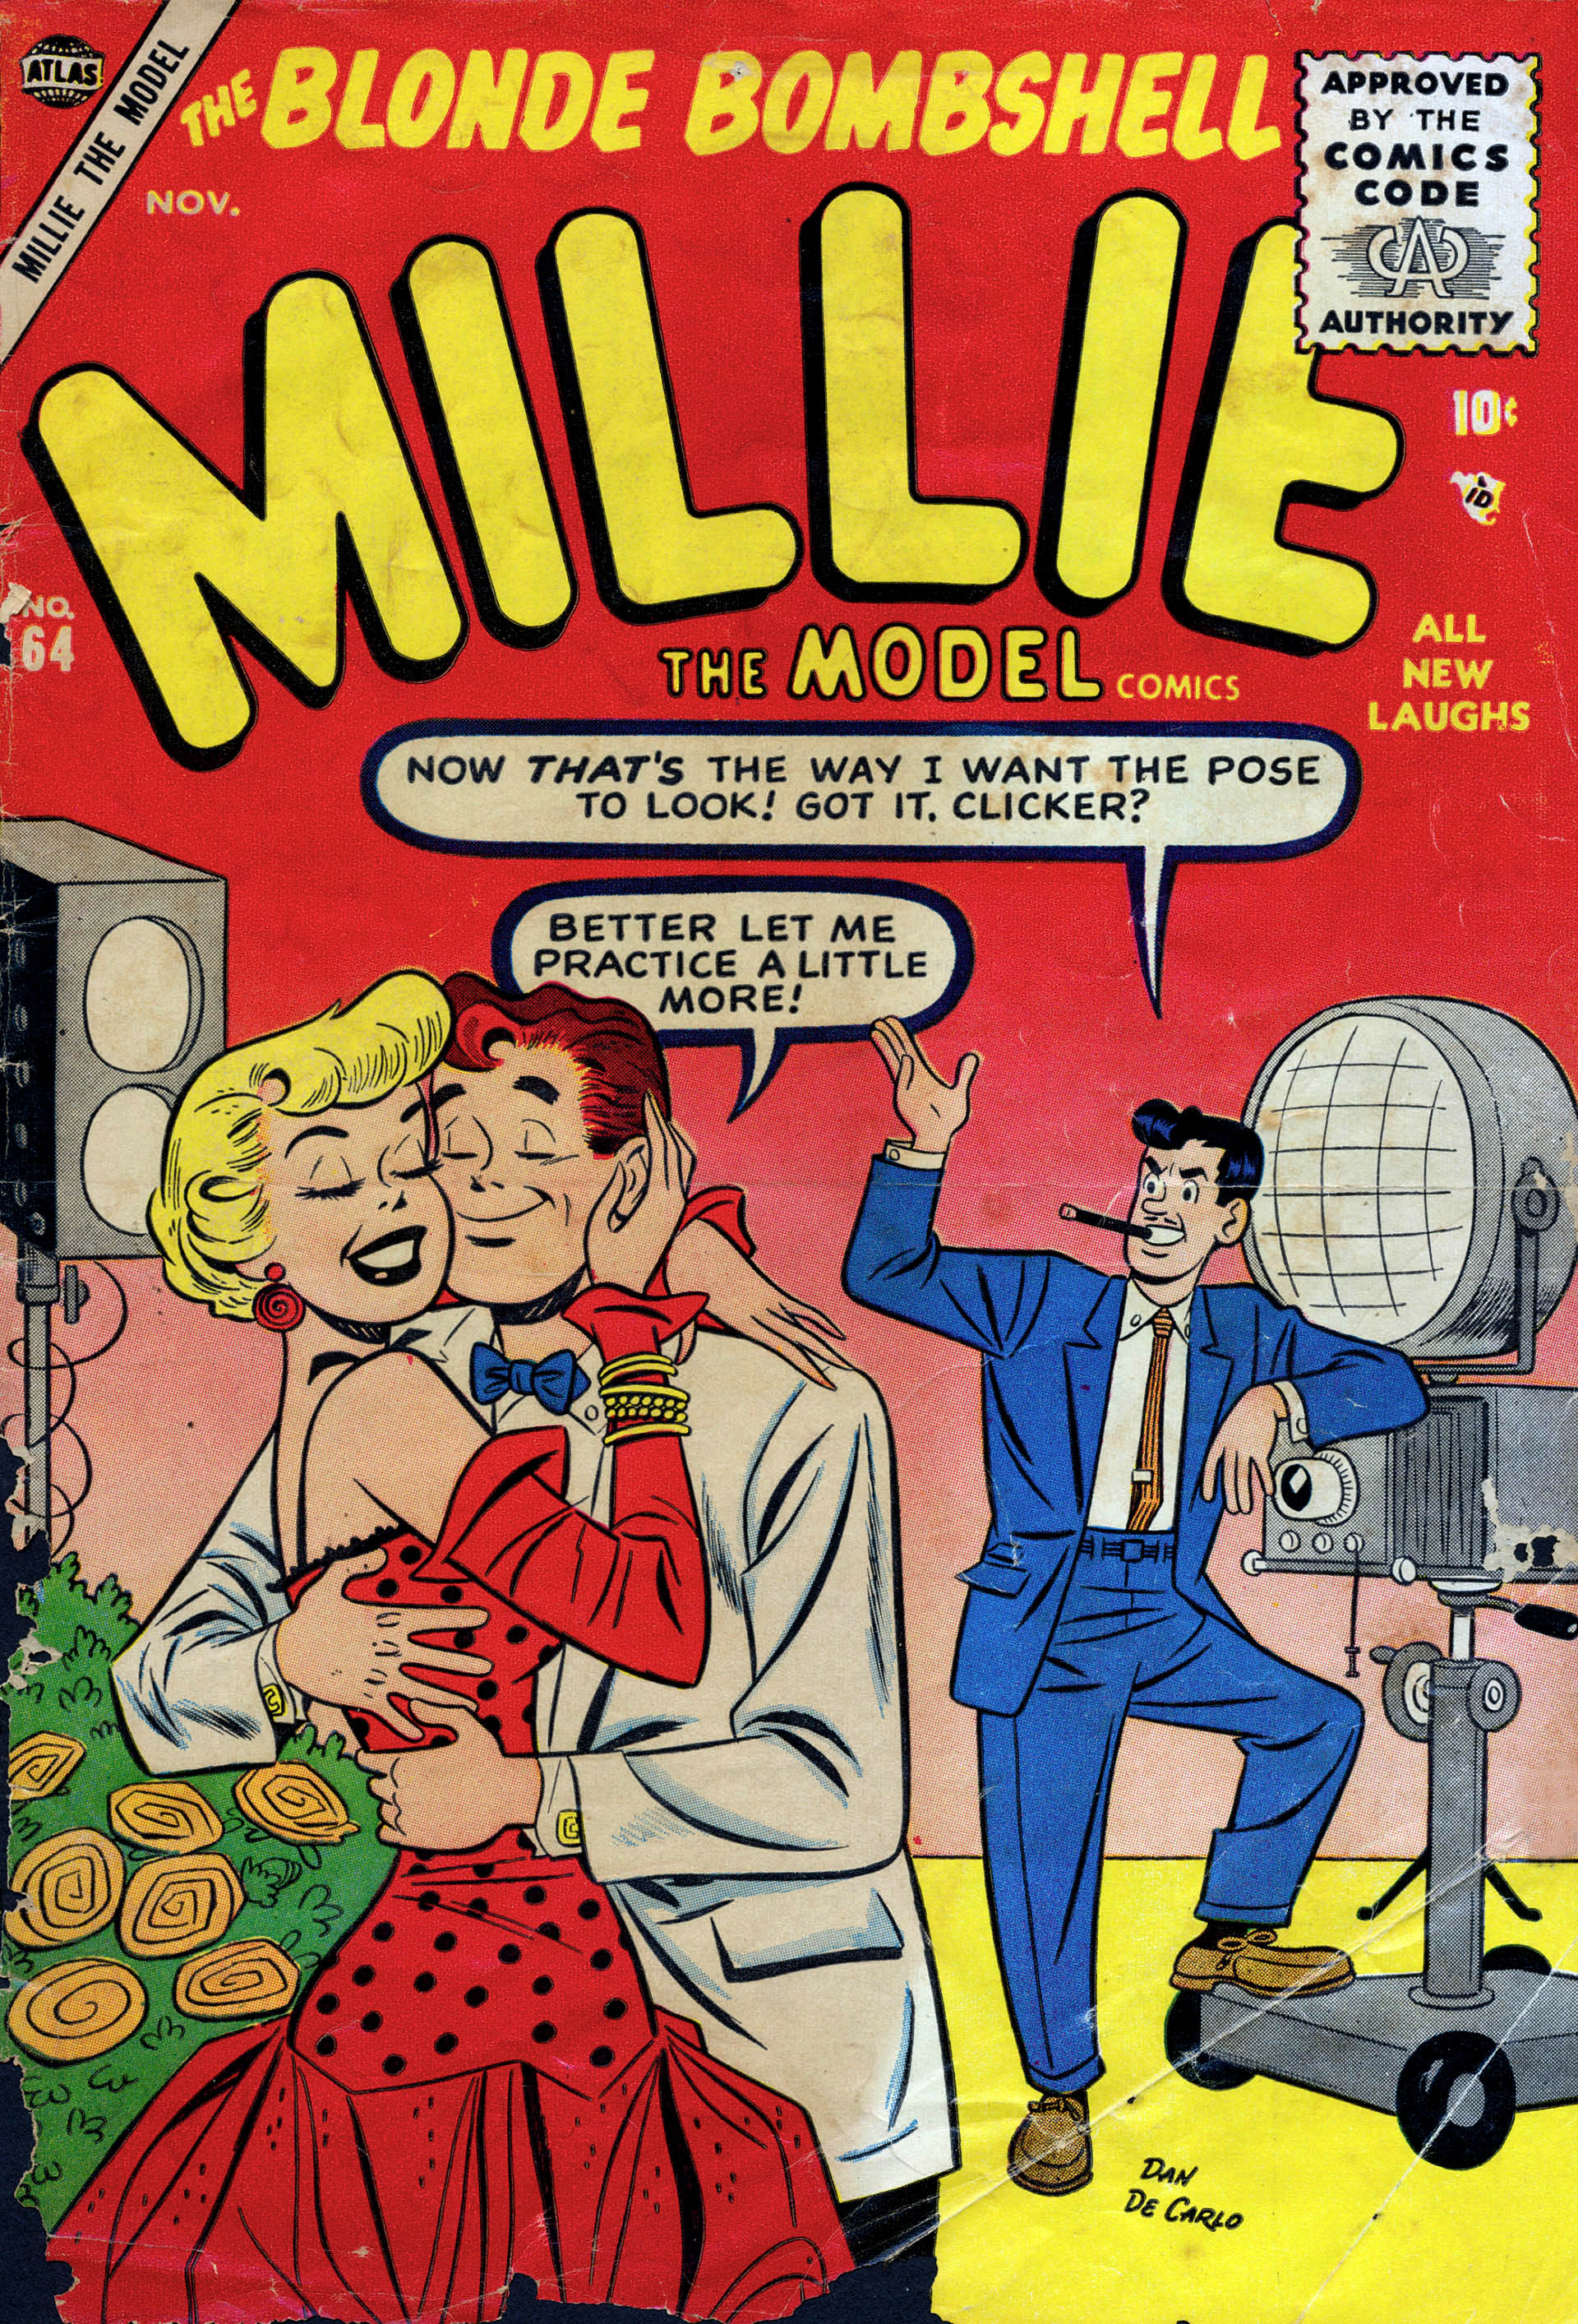 Read online Millie the Model comic -  Issue #64 - 1